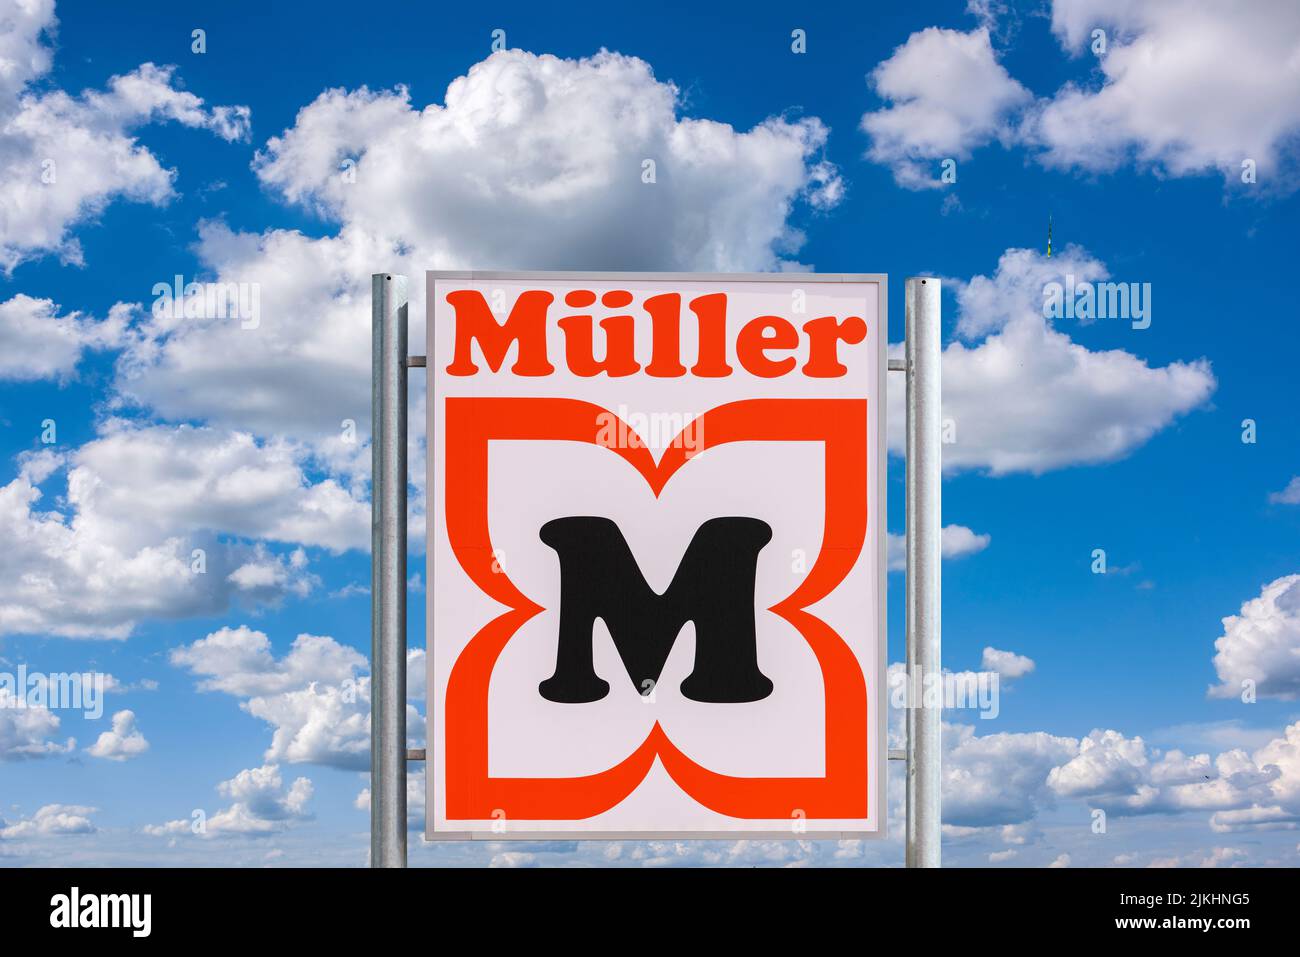 Company sign and logo of the discounter Müller Stock Photo